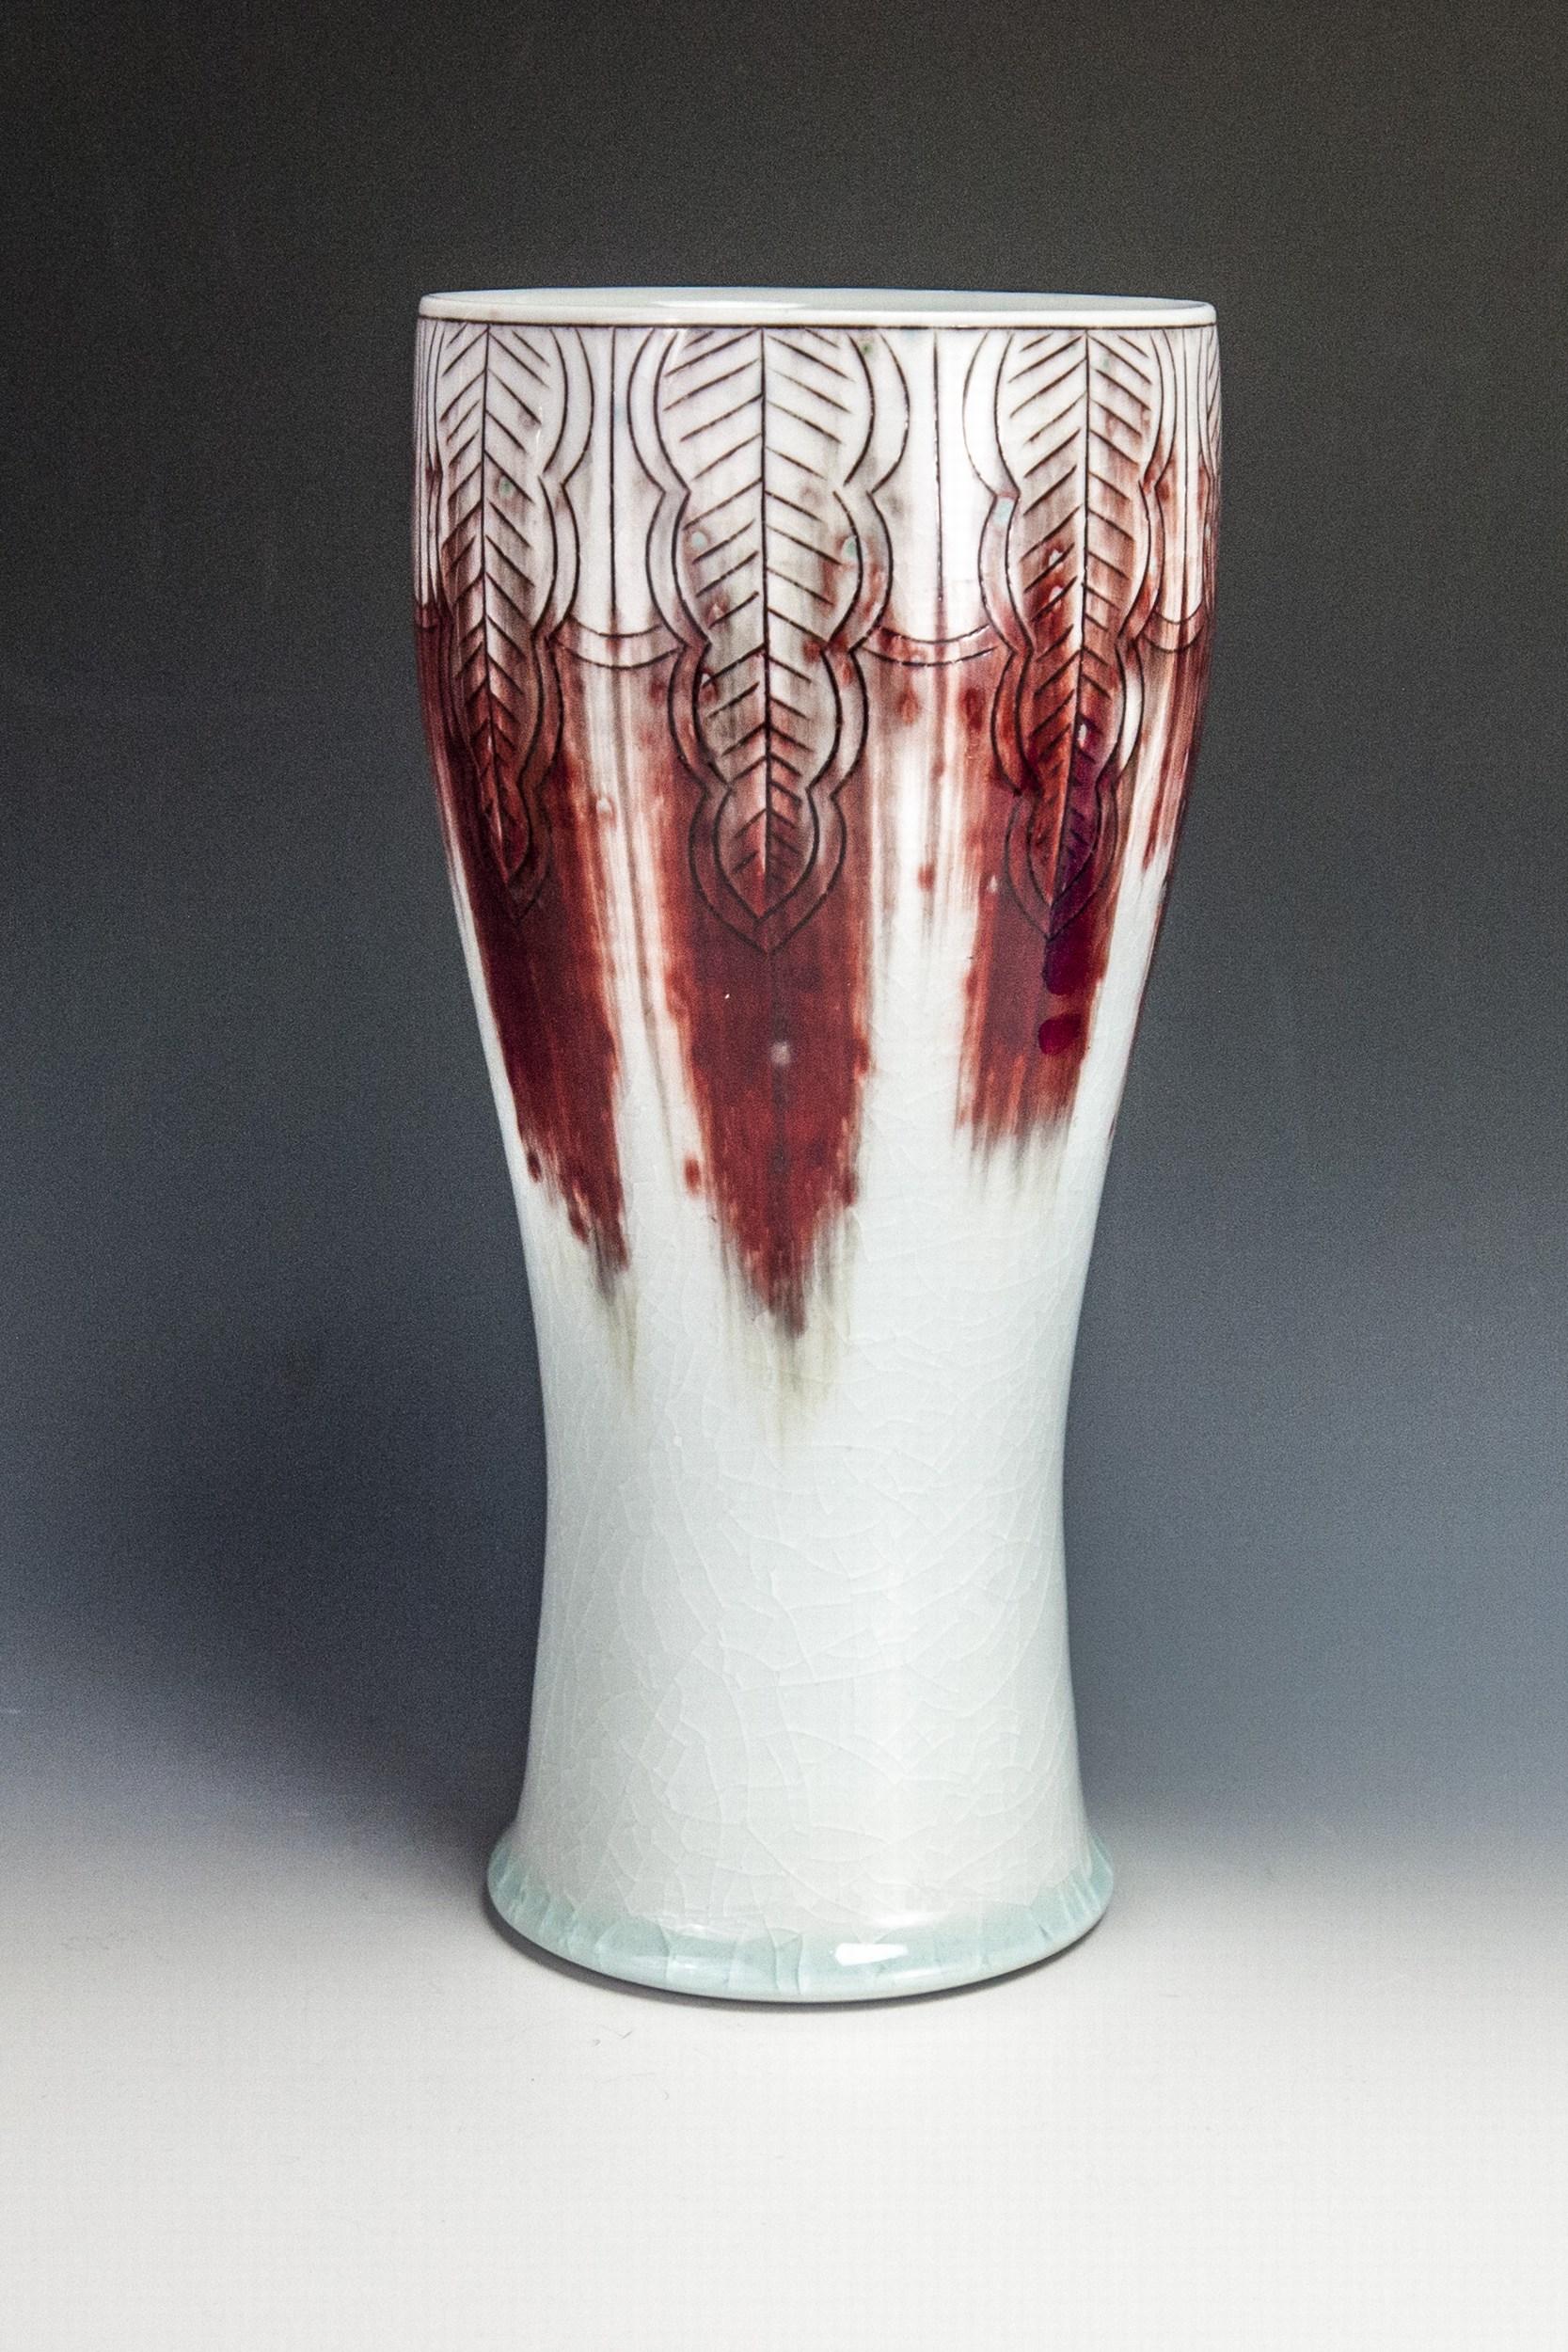 Red Blush Vase - Sculpture by Steven Young Lee